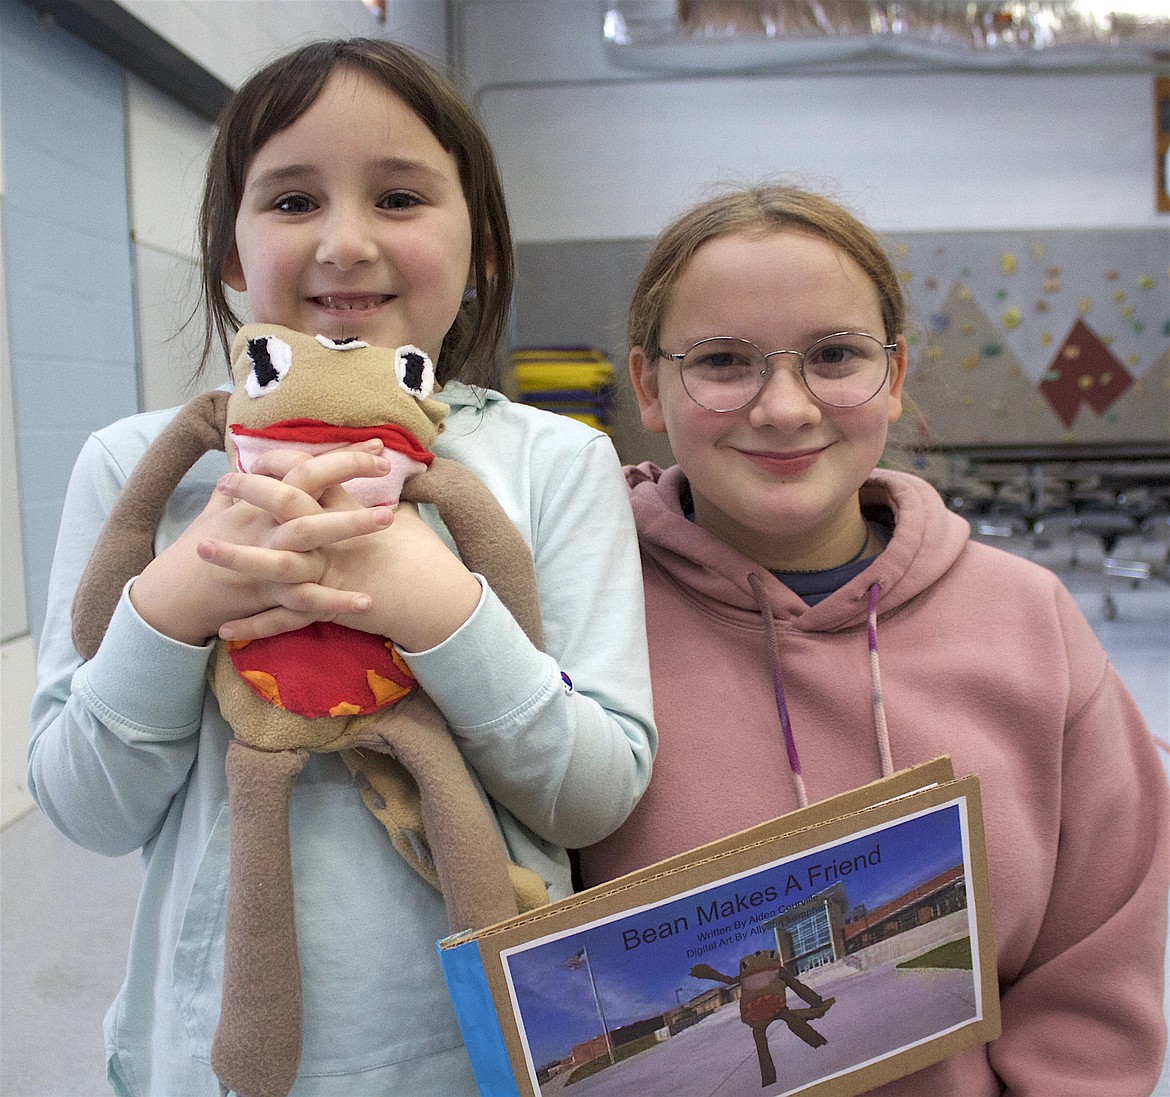 Cherry Valley first grader Elise McCurdy and Polson Middle School eighth grader Allyson Lamphere show off Elise's monster, and the story Allyson wrote titled "Bean Makes a Friend." (Tami Morrison photo)